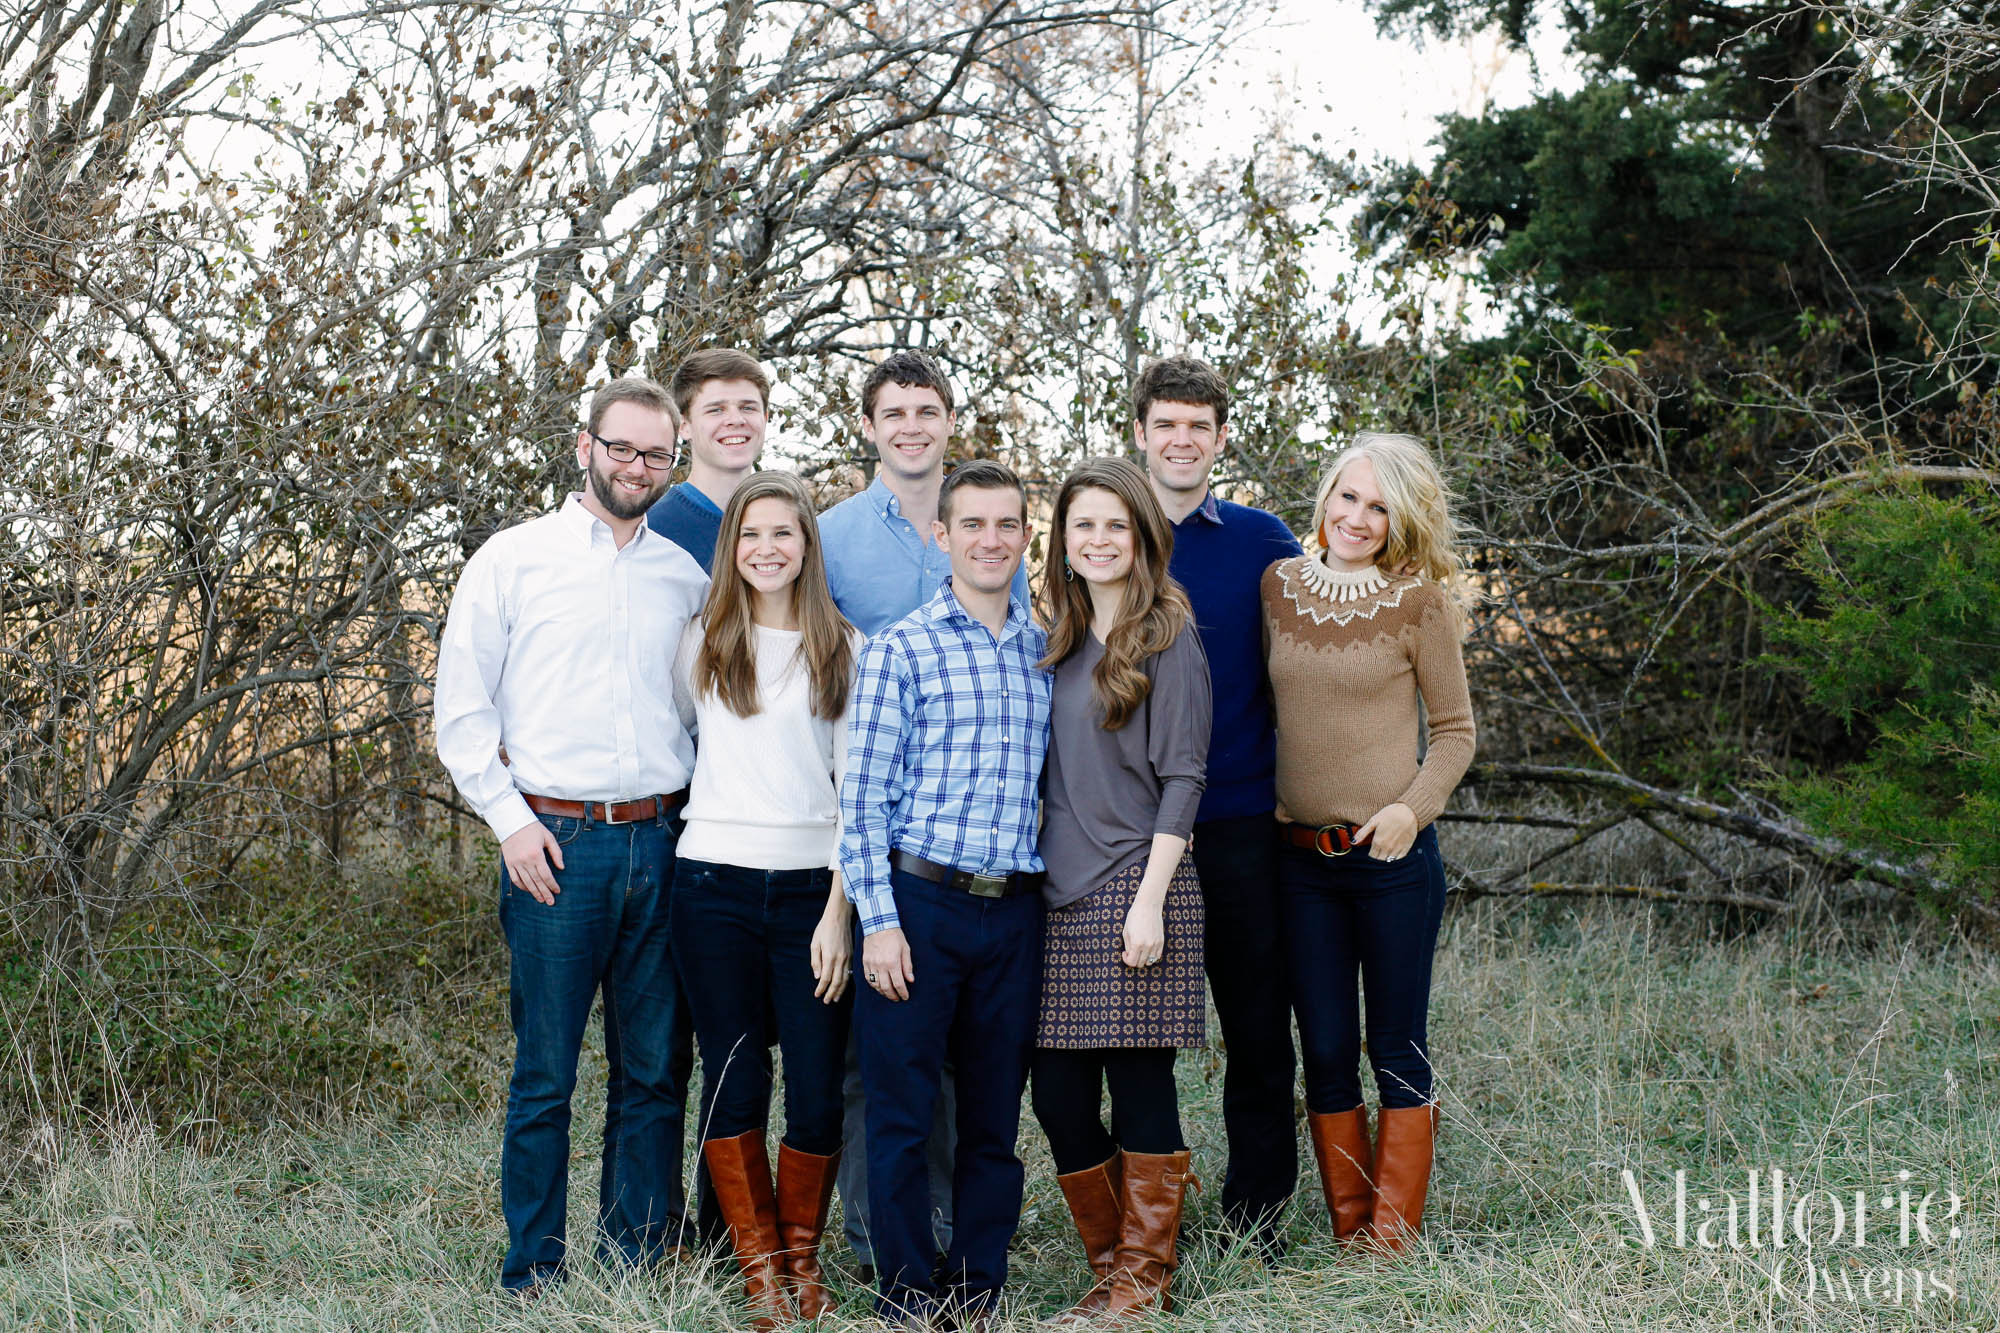 Family Photographer | MALLORIE OWENS